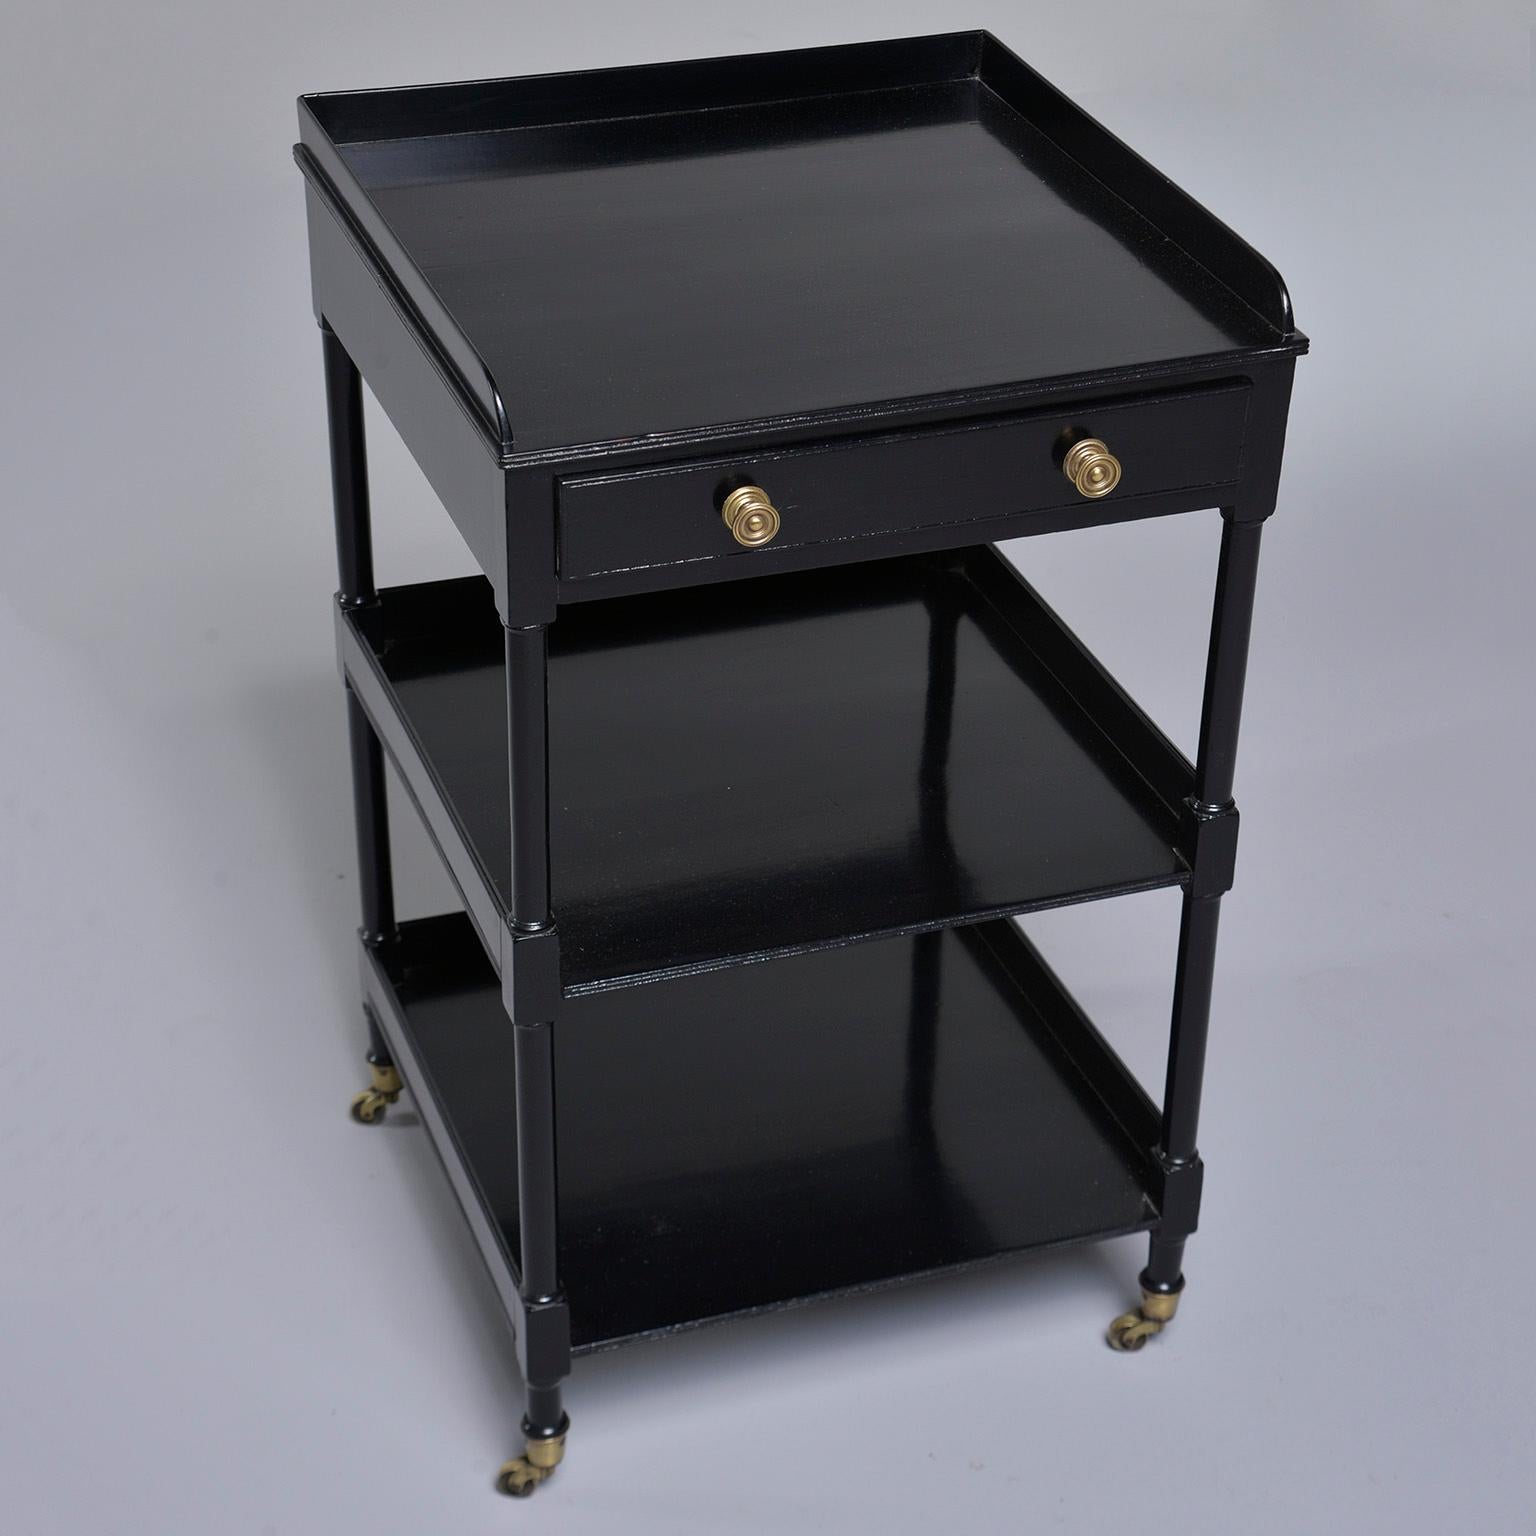 English mahogany three shelf étagère has a new ebonized finish, circa 1910. This piece features a single, functional drawer and original brass cup casters. Unknown maker.